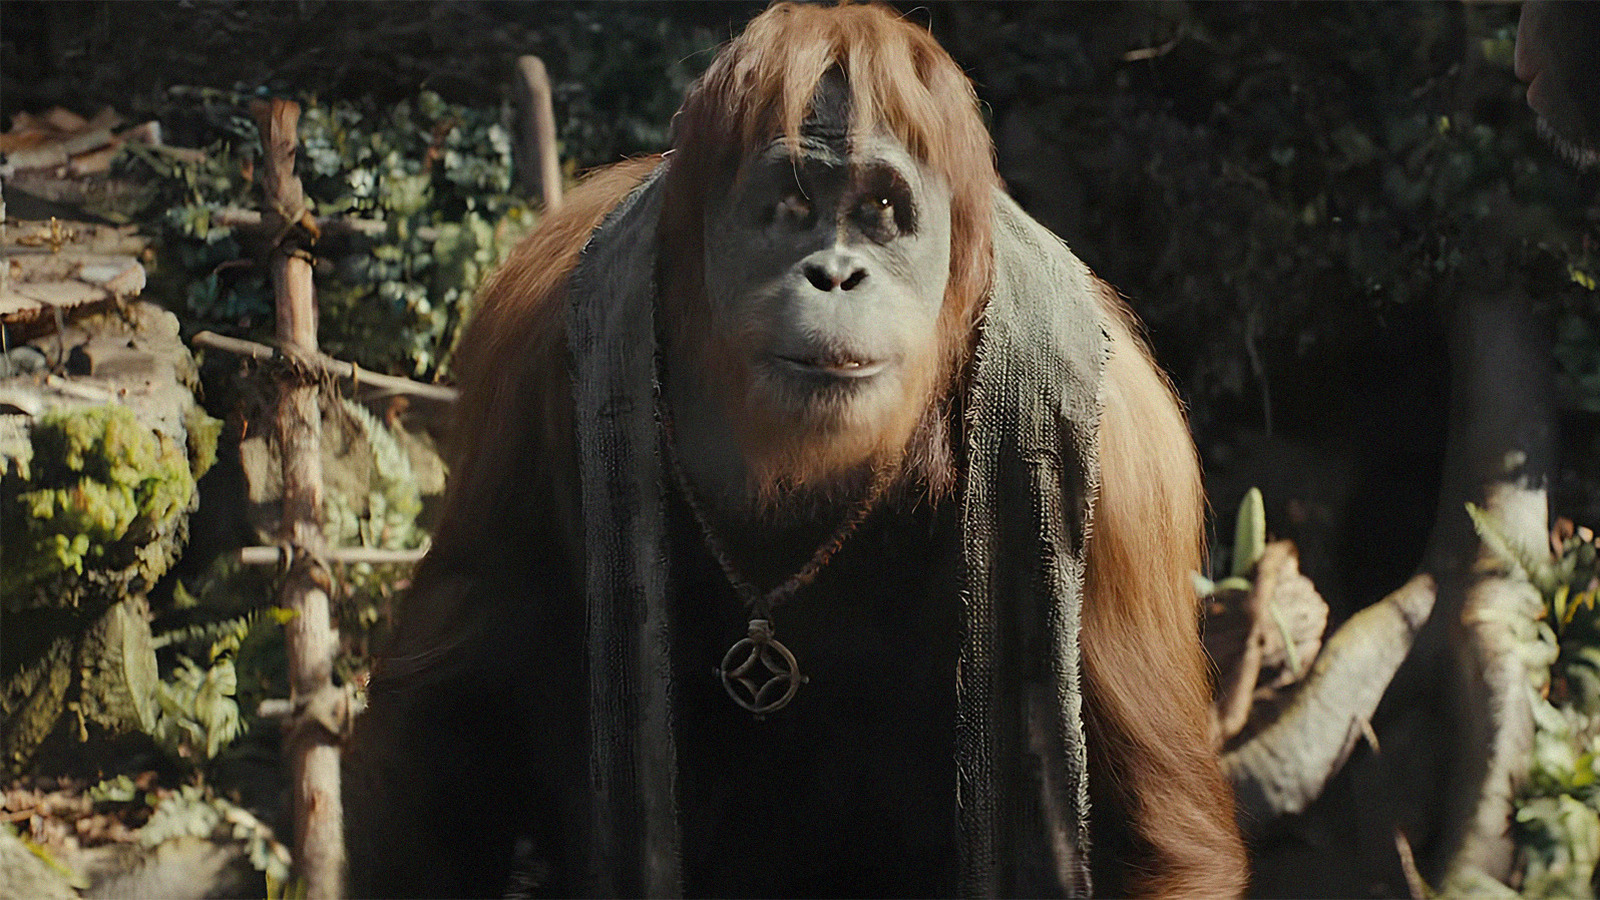 The Kingdom Of The Of The Apes Trailer Is That Doctor Zaius